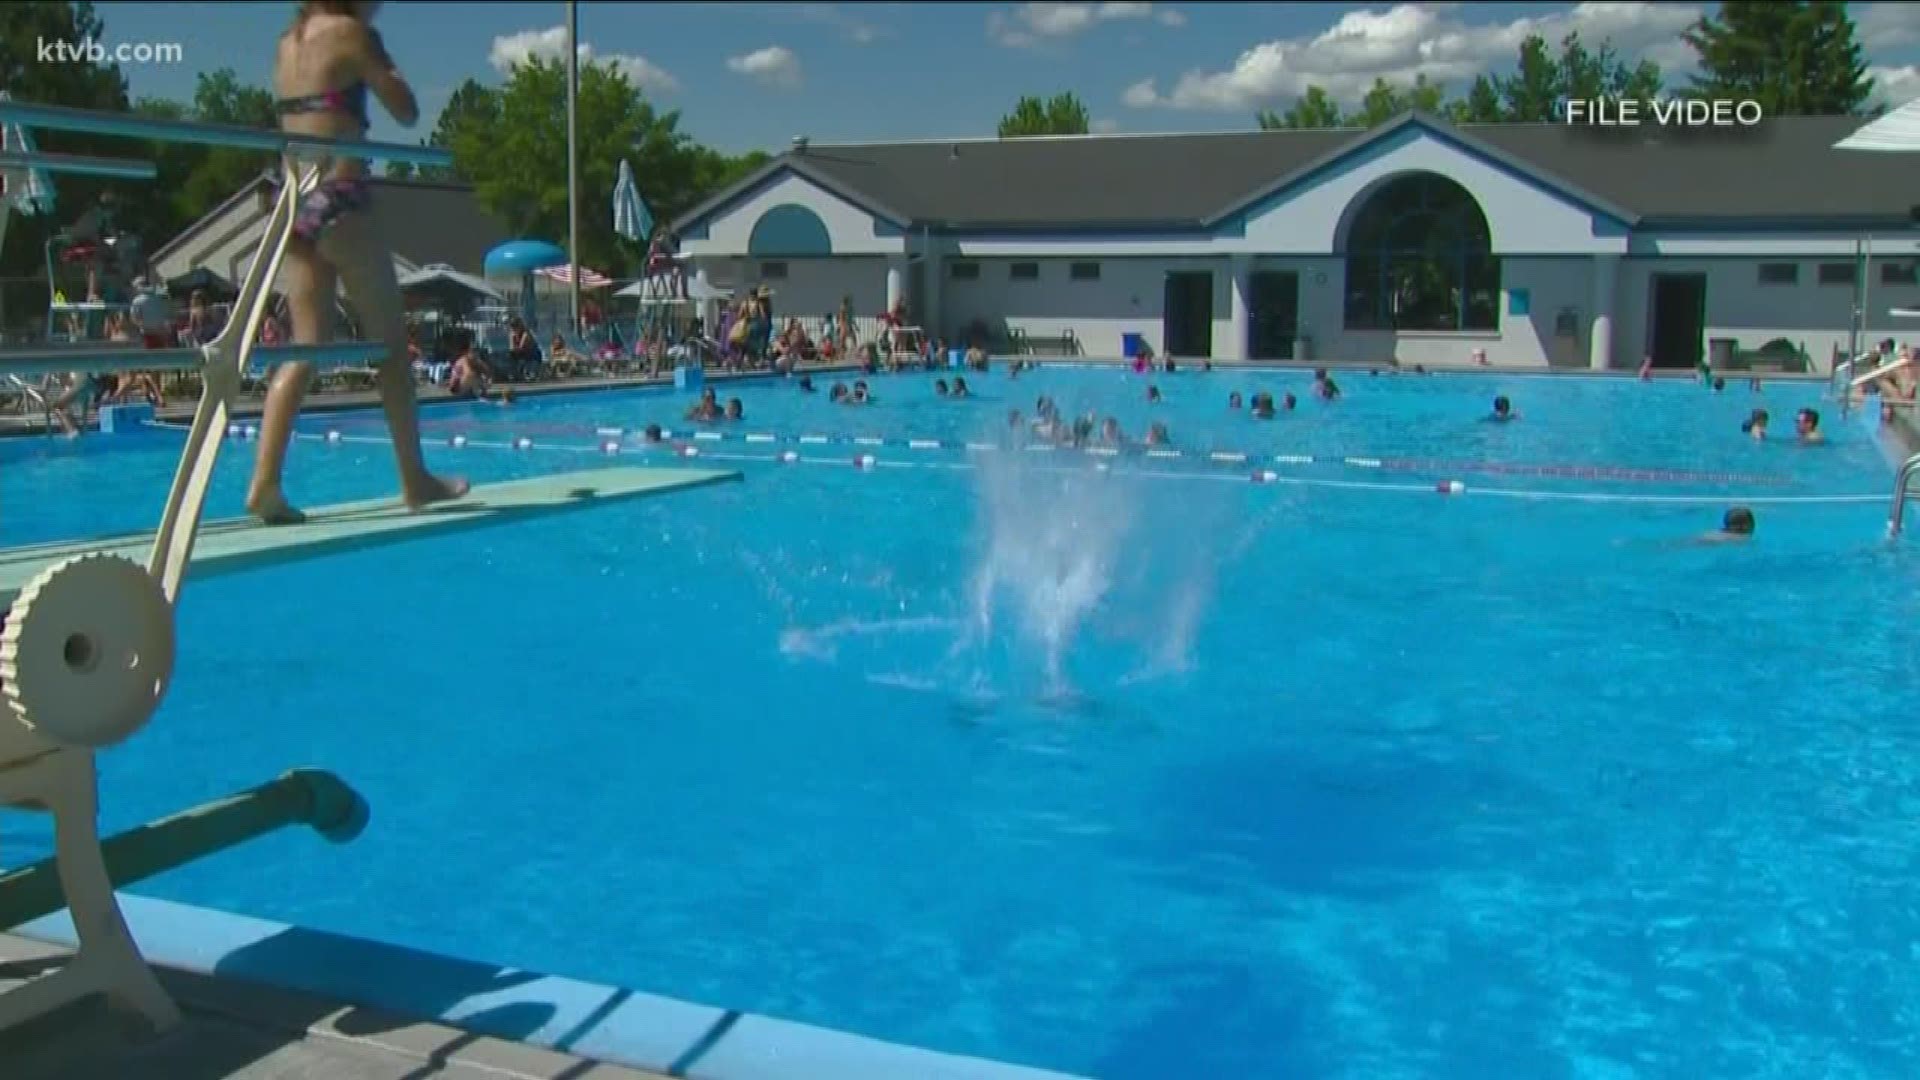 Boise Parks and Recreation Department has decided to close all its public pools for the entire summer.